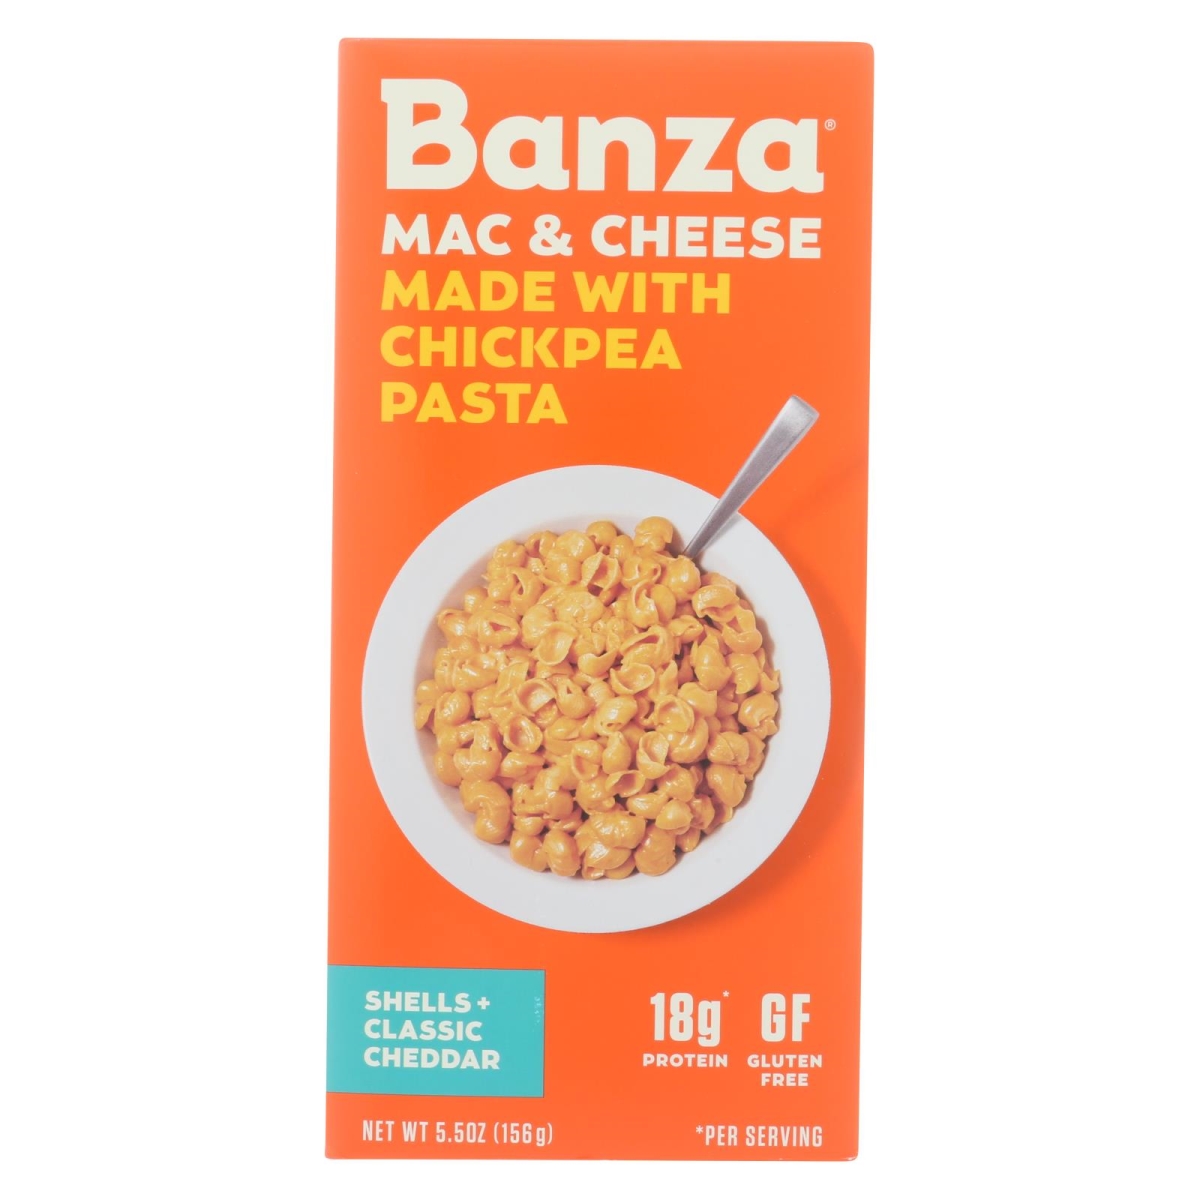 Picture of Banza HG2347037 5.5 oz Chickpea Mac & Cheese Pasta - Shells & Classic Cheddar - Case of 6